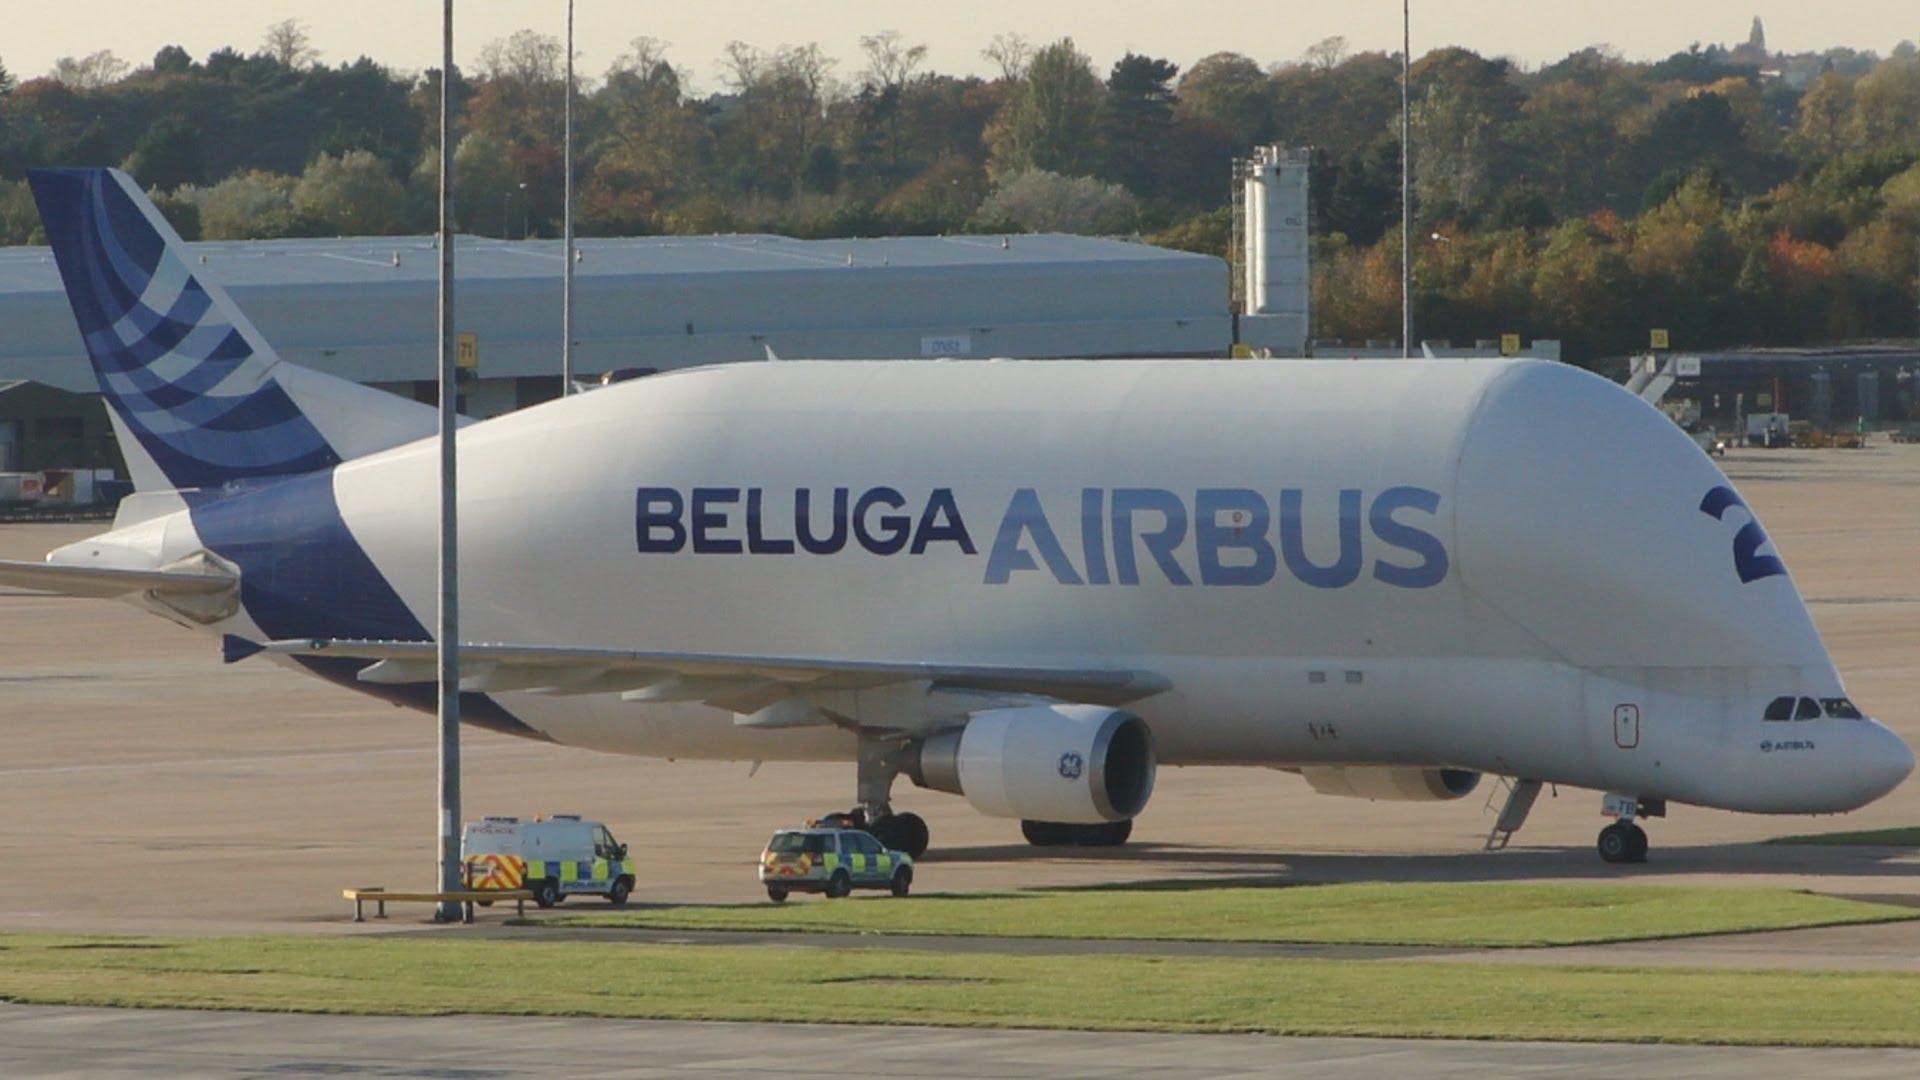 Airbus Beluga A300 Super Transporter @ Manchester Airport - YouTube